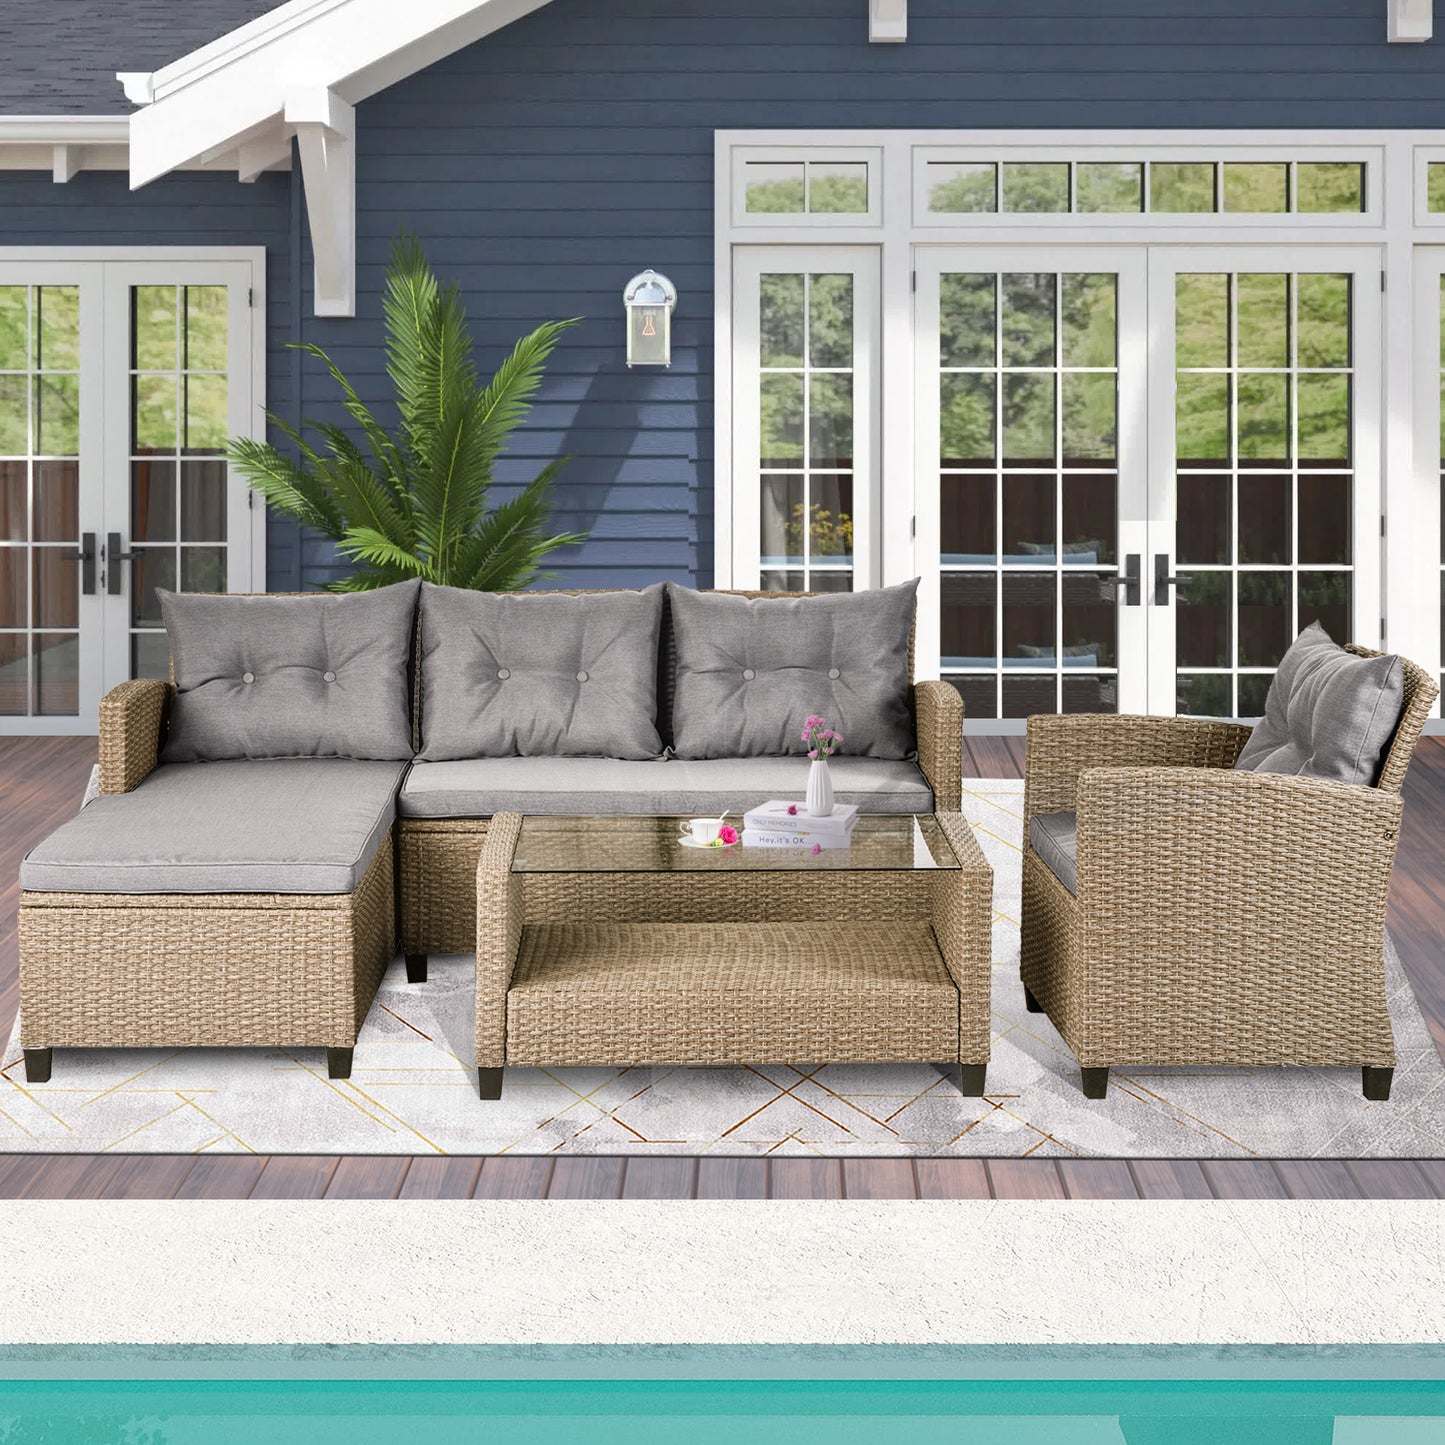 SYNGAR 4 Pieces Patio Furniture Sectional Set, Outdoor All-Weather Manual Weaving Wicker Conversation Set with Cushion & Table, Rattan Sectional Sofa Set, Yard Porch Deck Use Furniture Set, B630